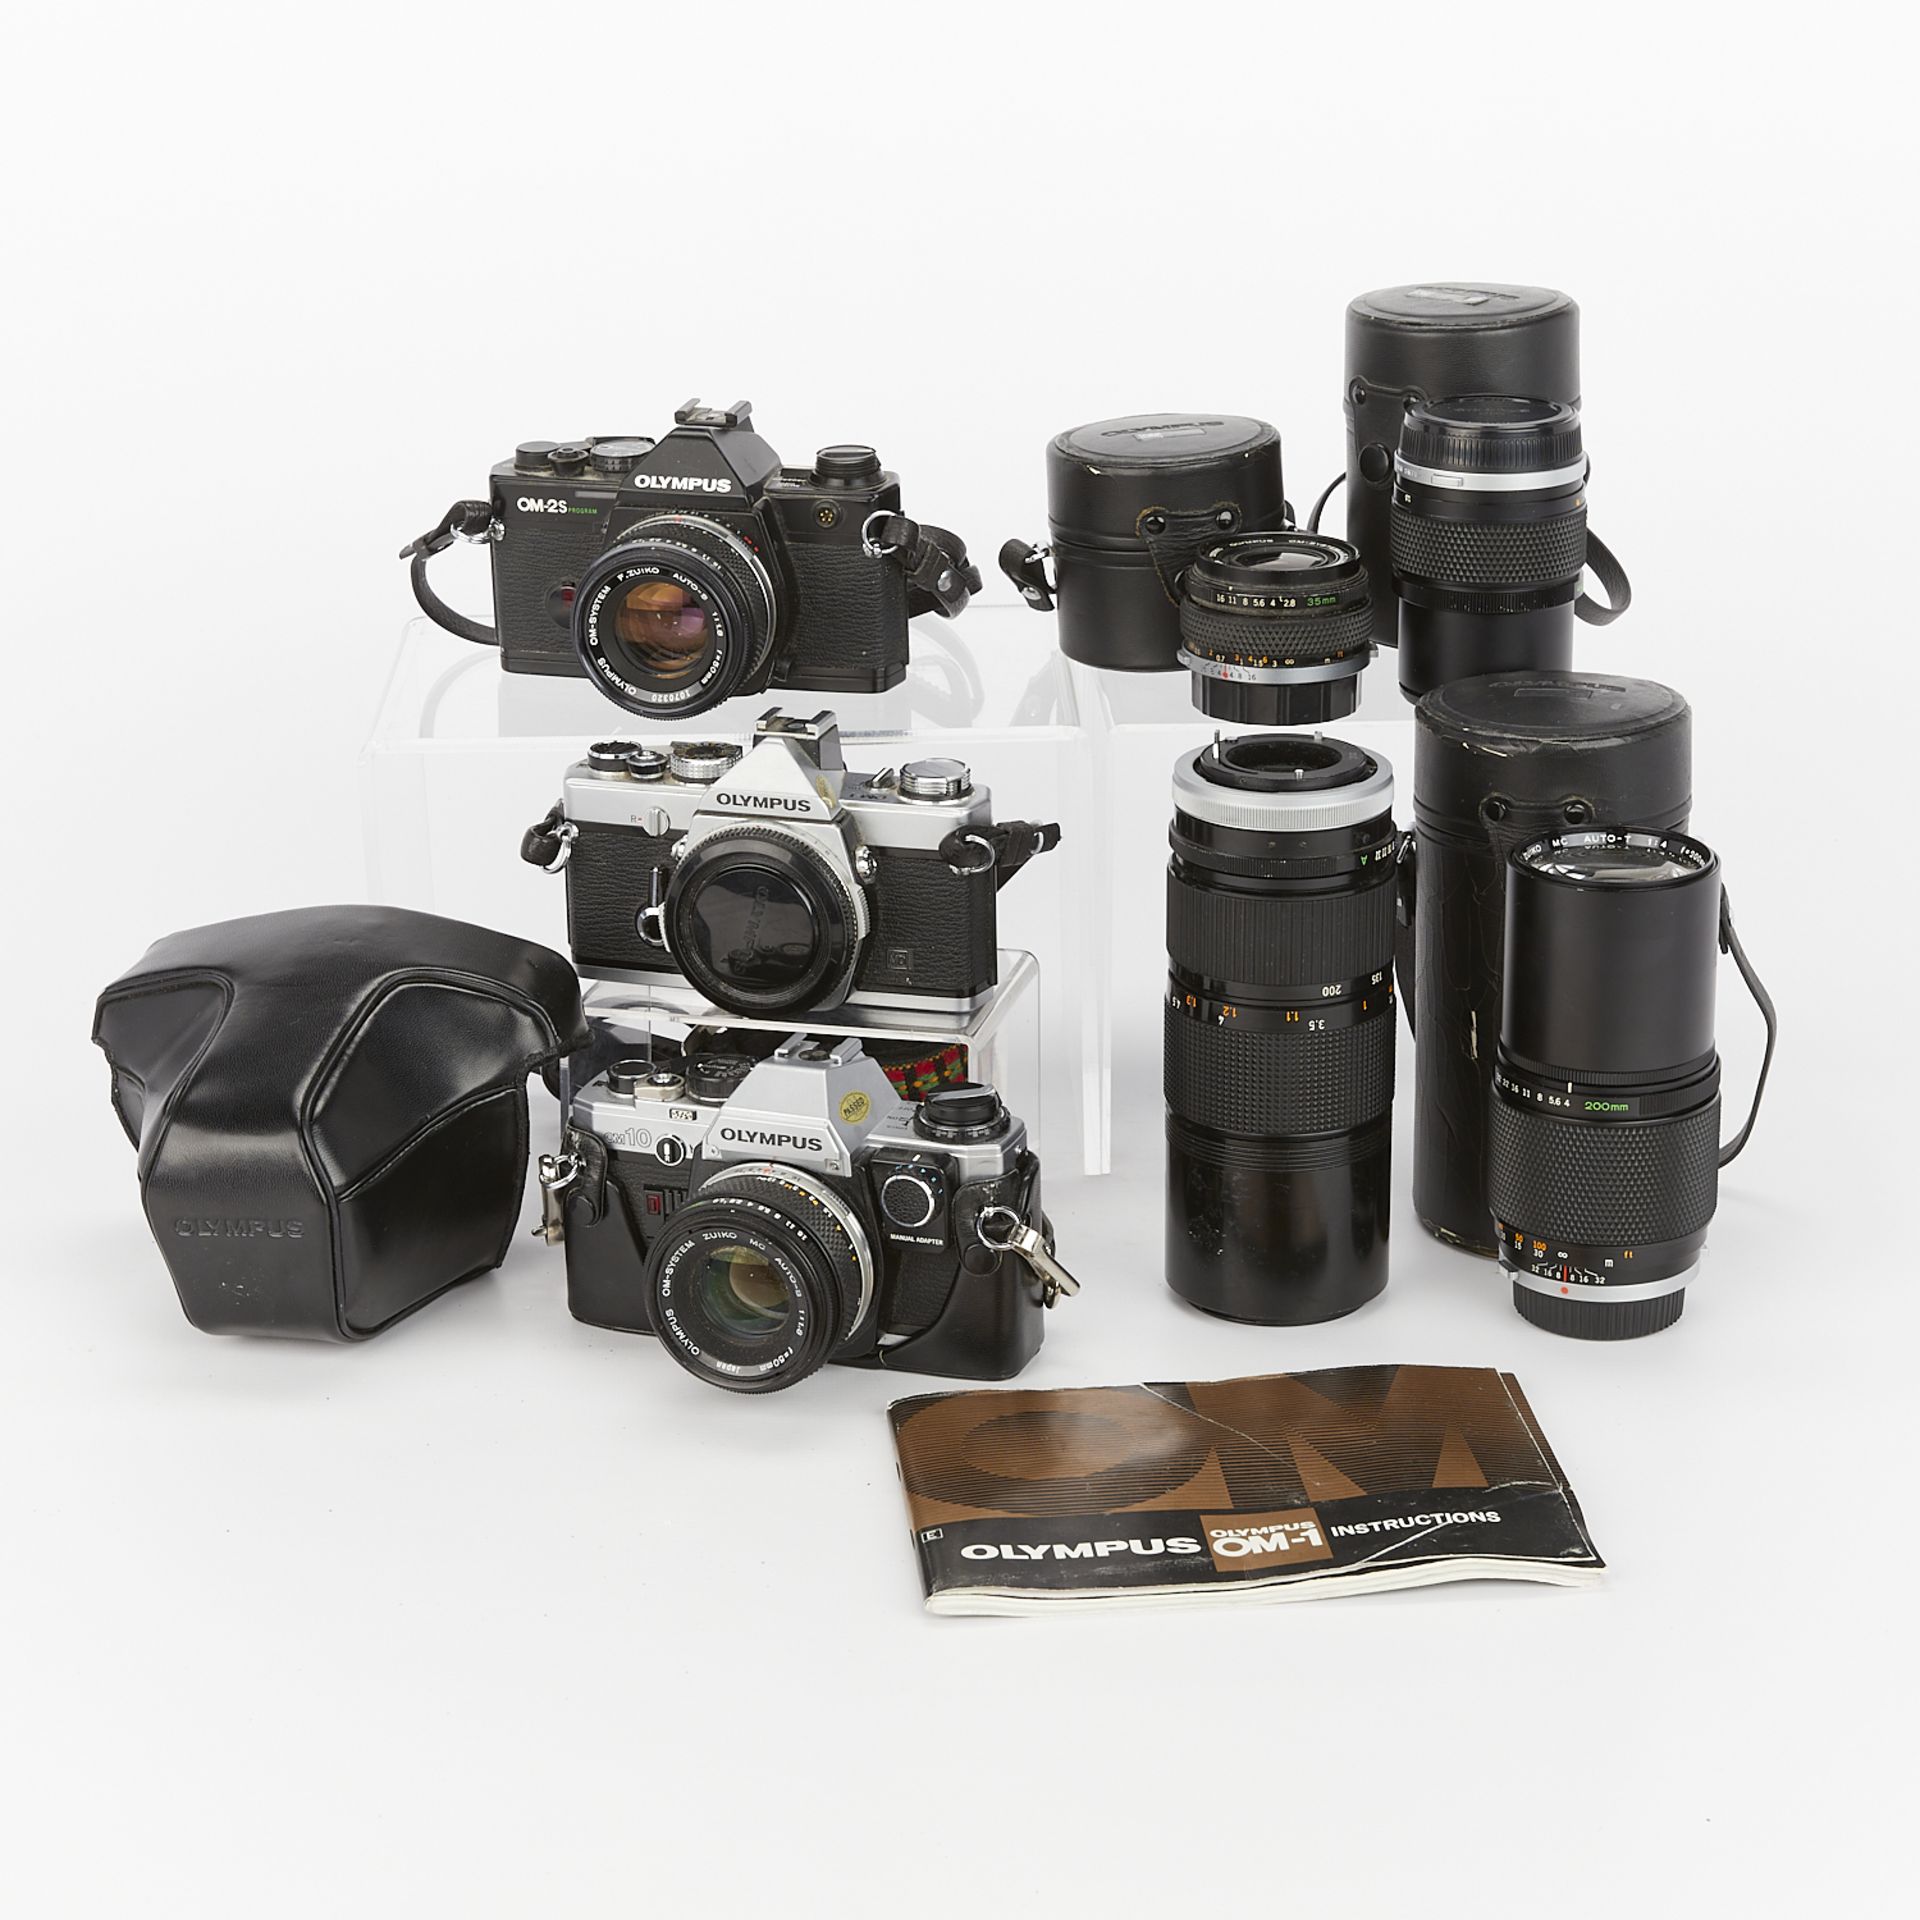 Group of 7 Olympus Cameras & Lenses